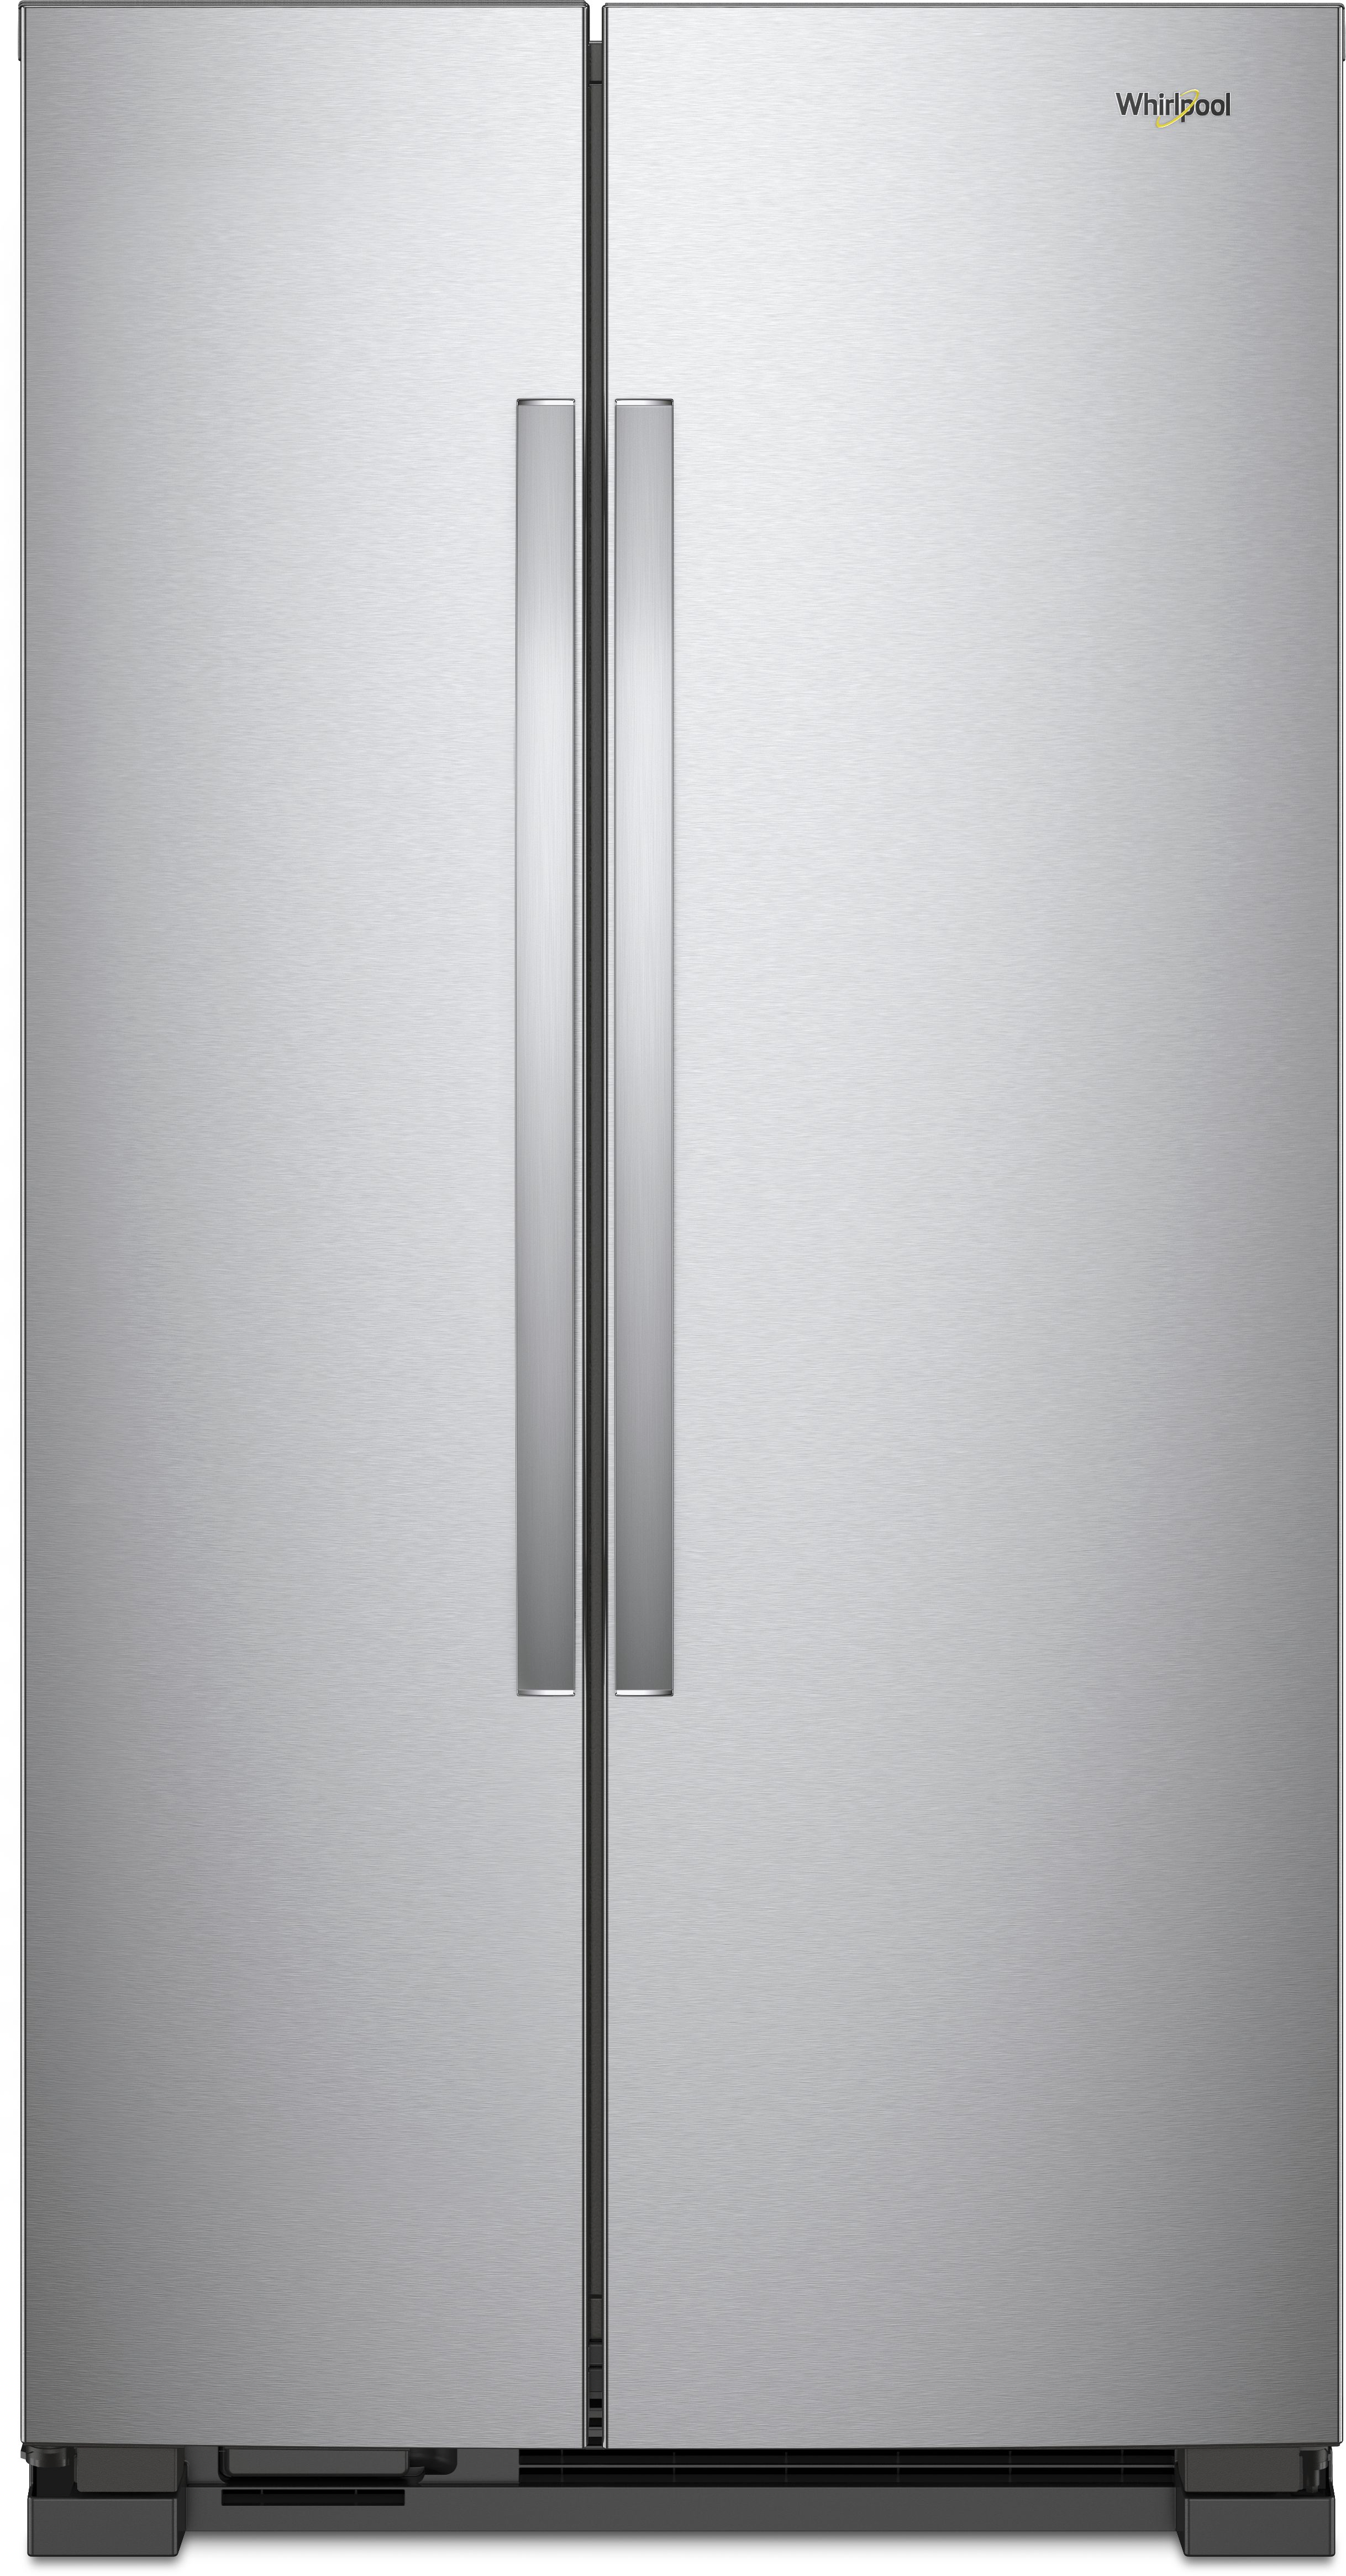 Whirlpool® 25.1 Cu. Ft. Monochromatic Stainless Steel Side-By-Side Refrigerator-WRS315SNHM